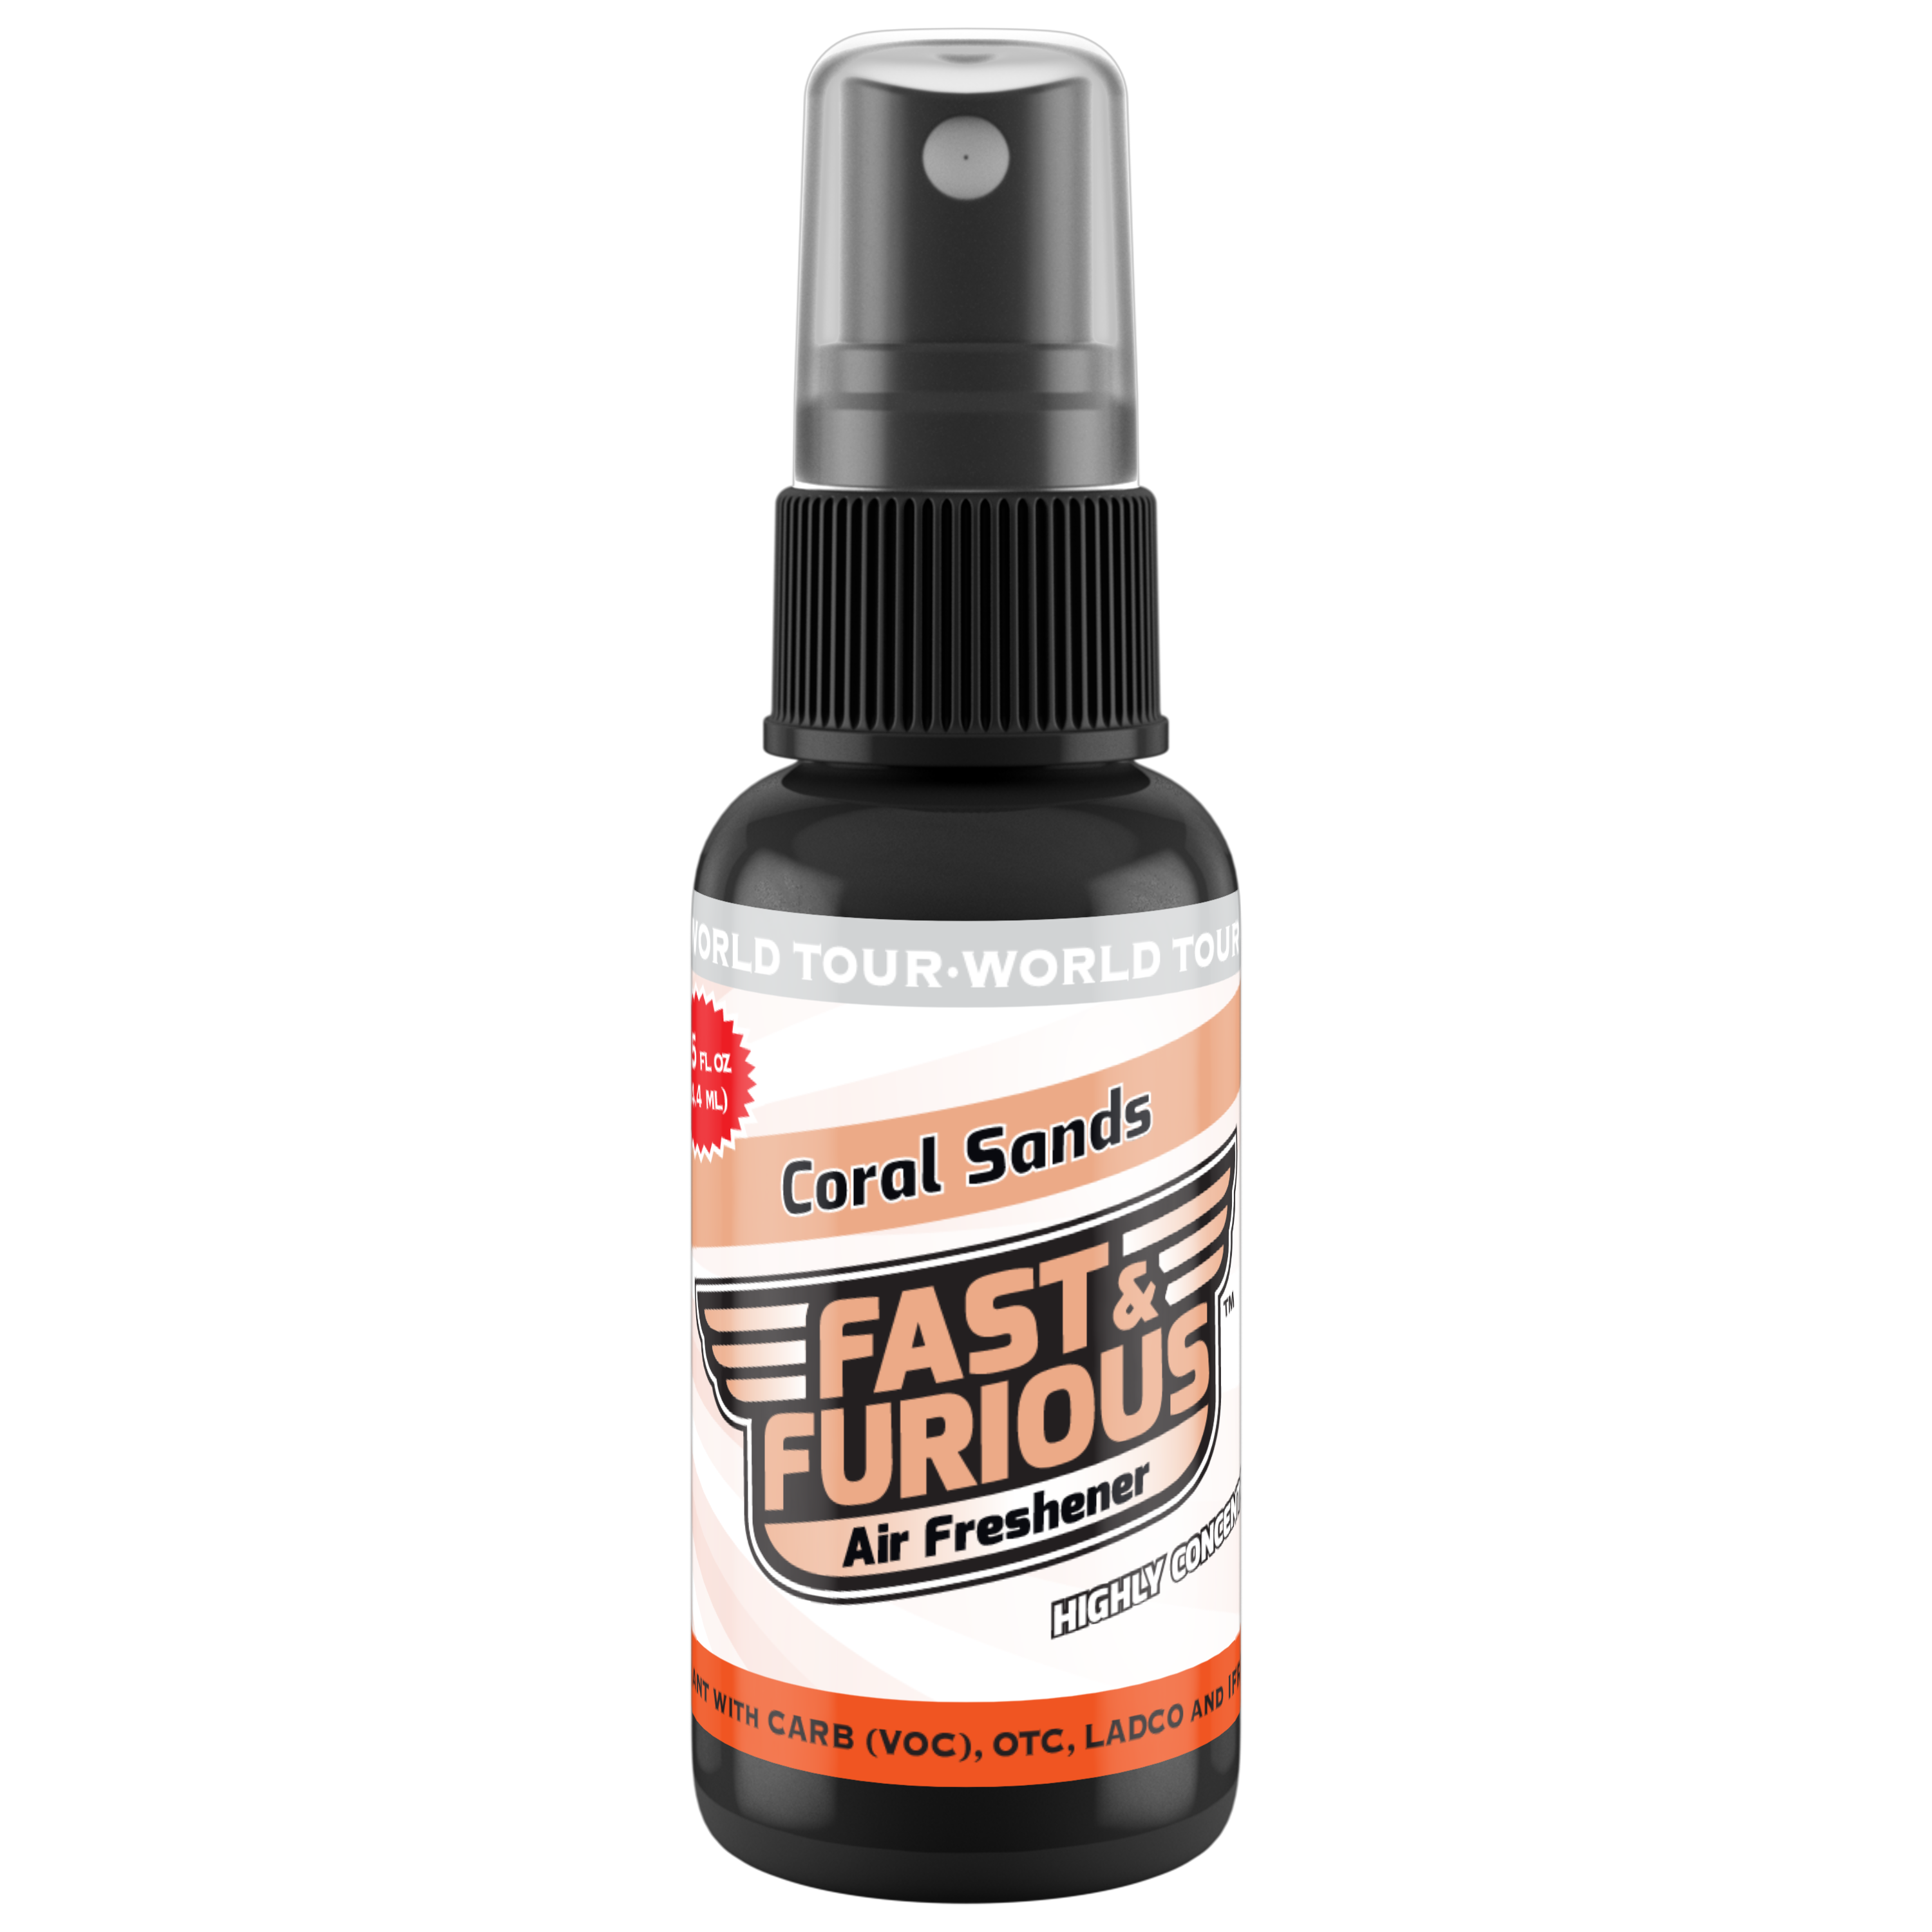 Fast and Furious Air Freshener - Coral Sands Scent